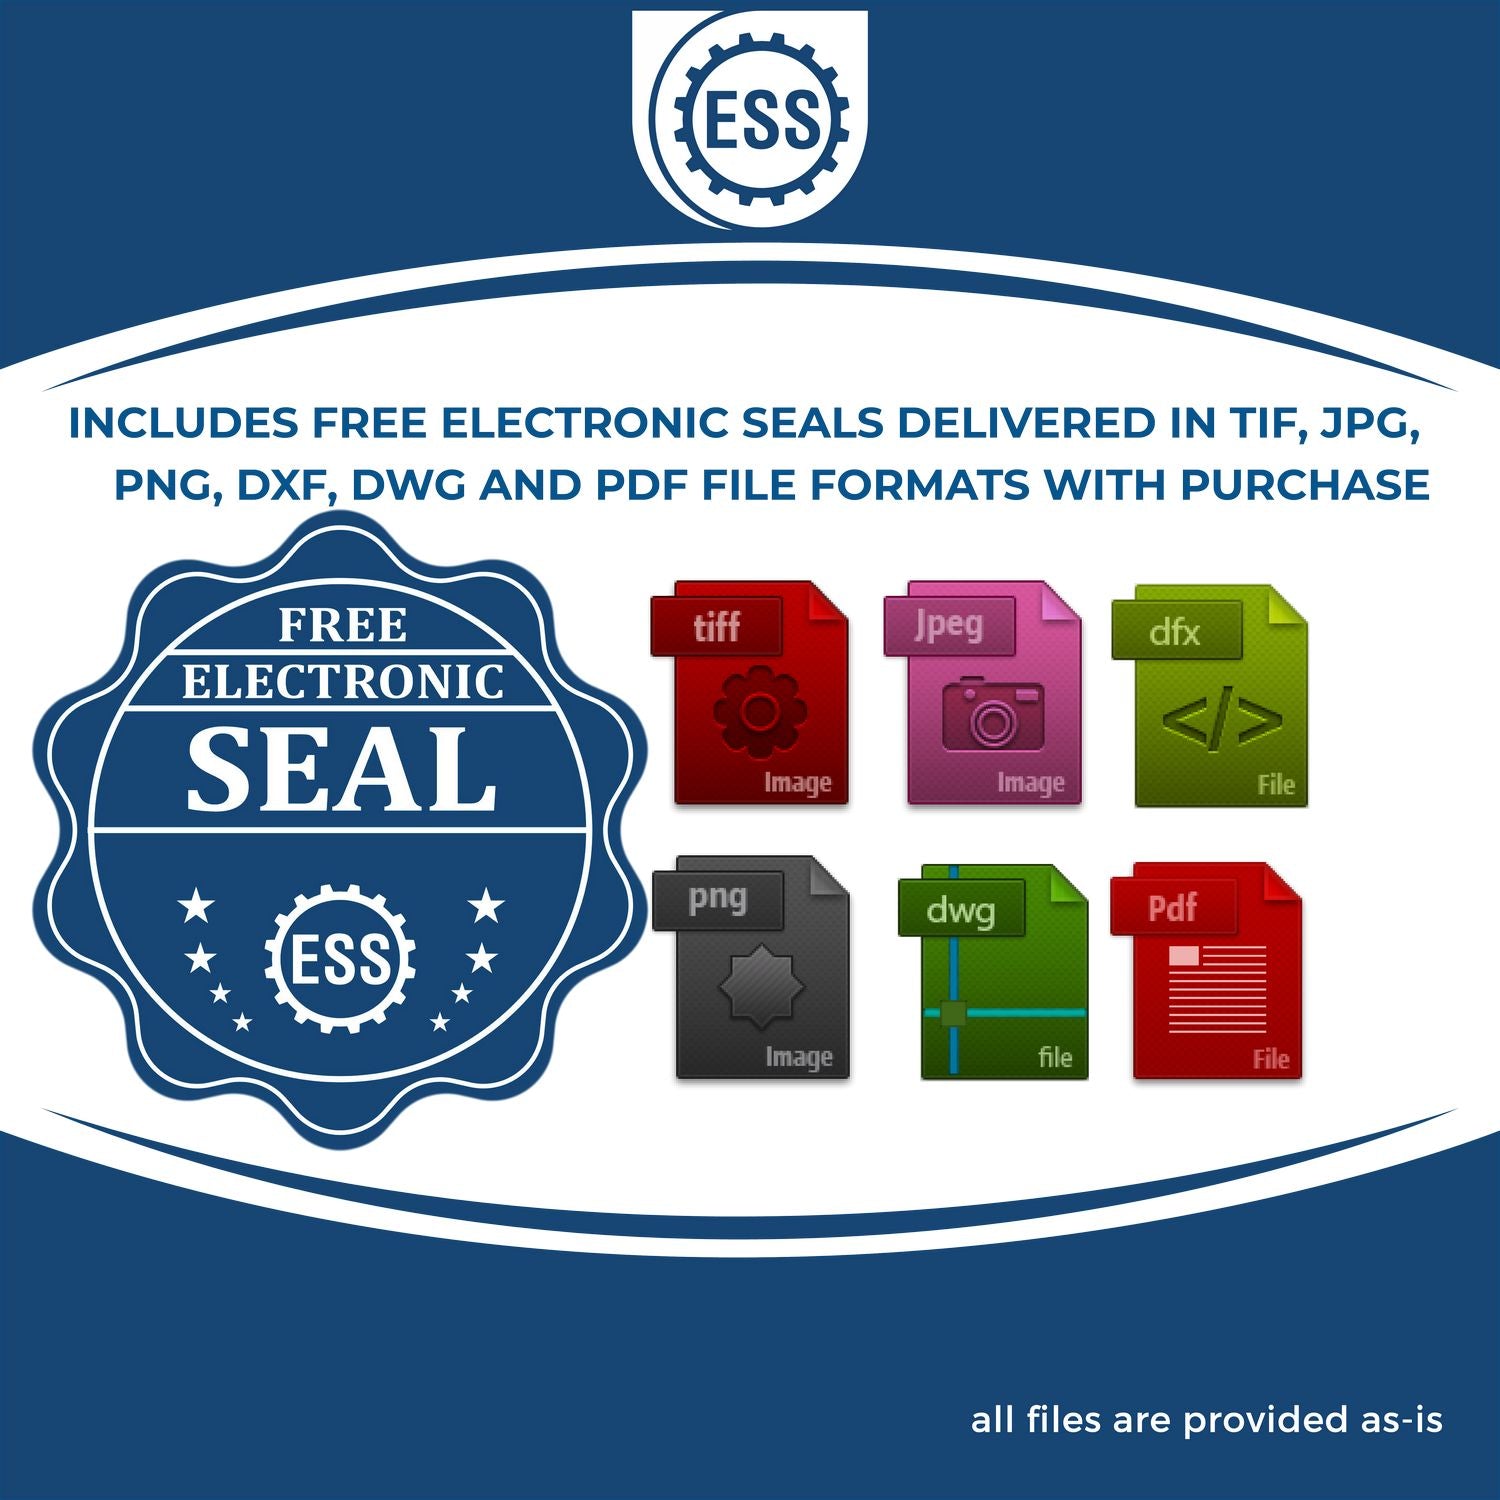 An infographic for the free electronic seal for the Alabama Long Reach Landscape Architect Embossing Stamp illustrating the different file type icons such as DXF, DWG, TIF, JPG and PNG.